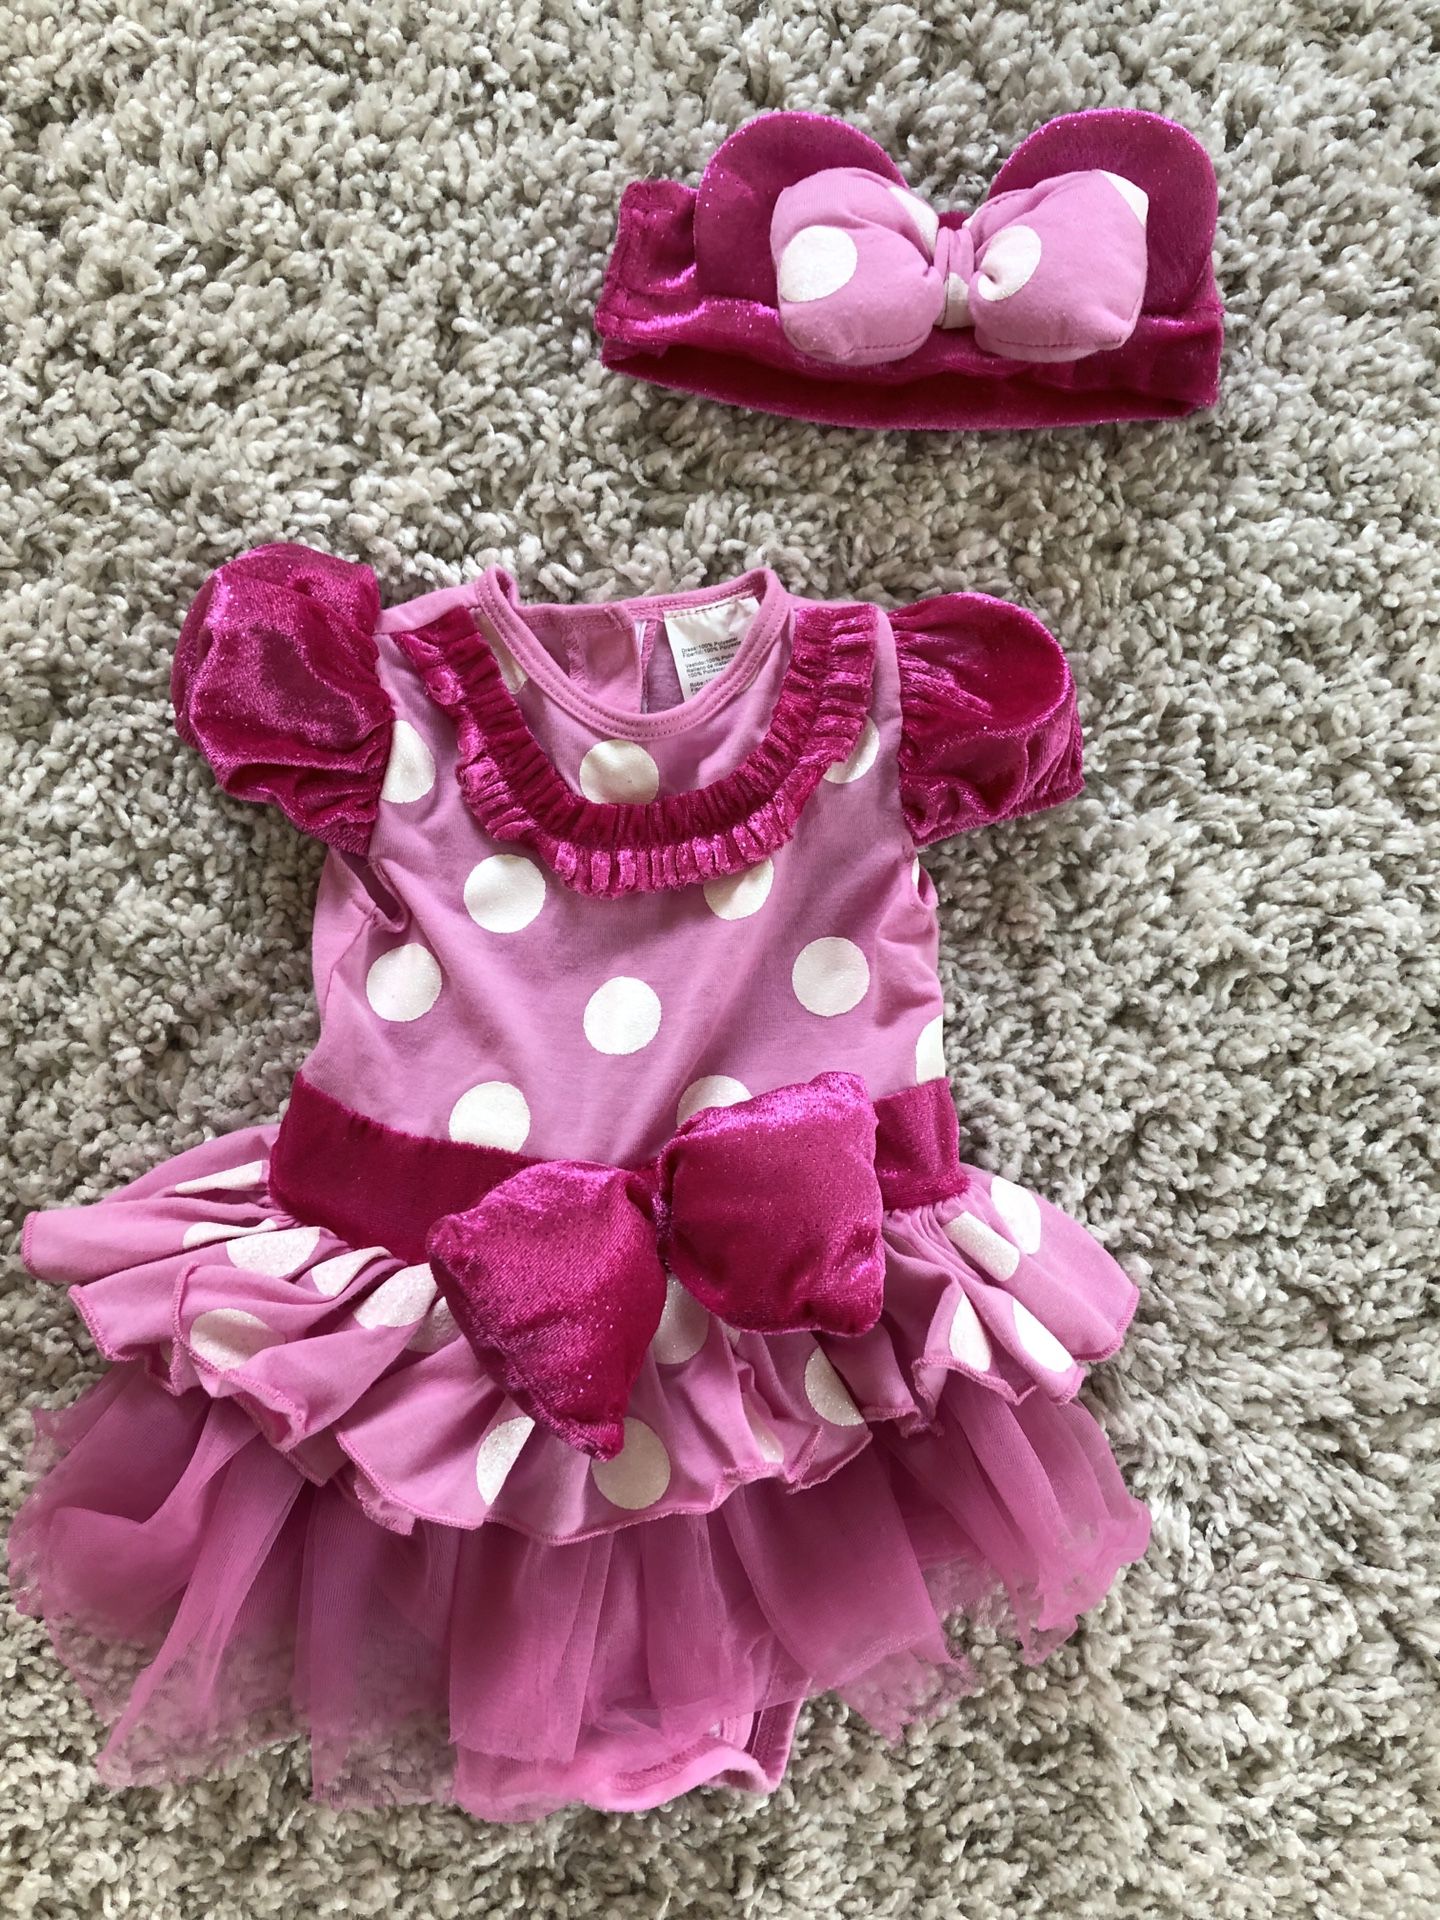 Minnie Mouse baby costume